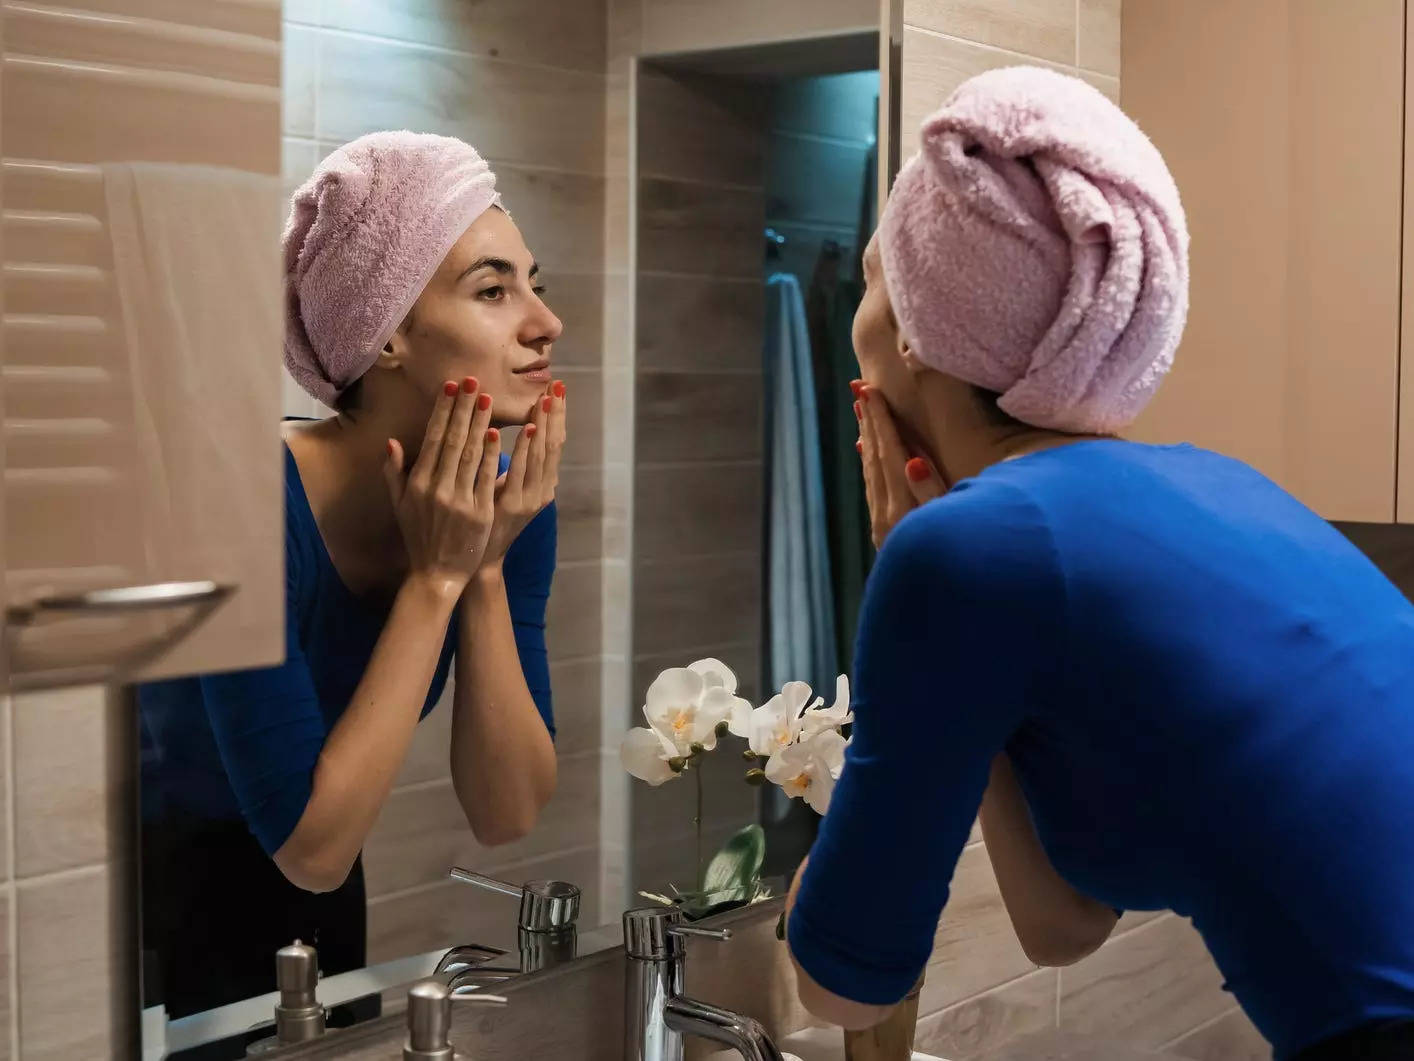 A woman wearing a towel on her head washing her face in front of the mirror